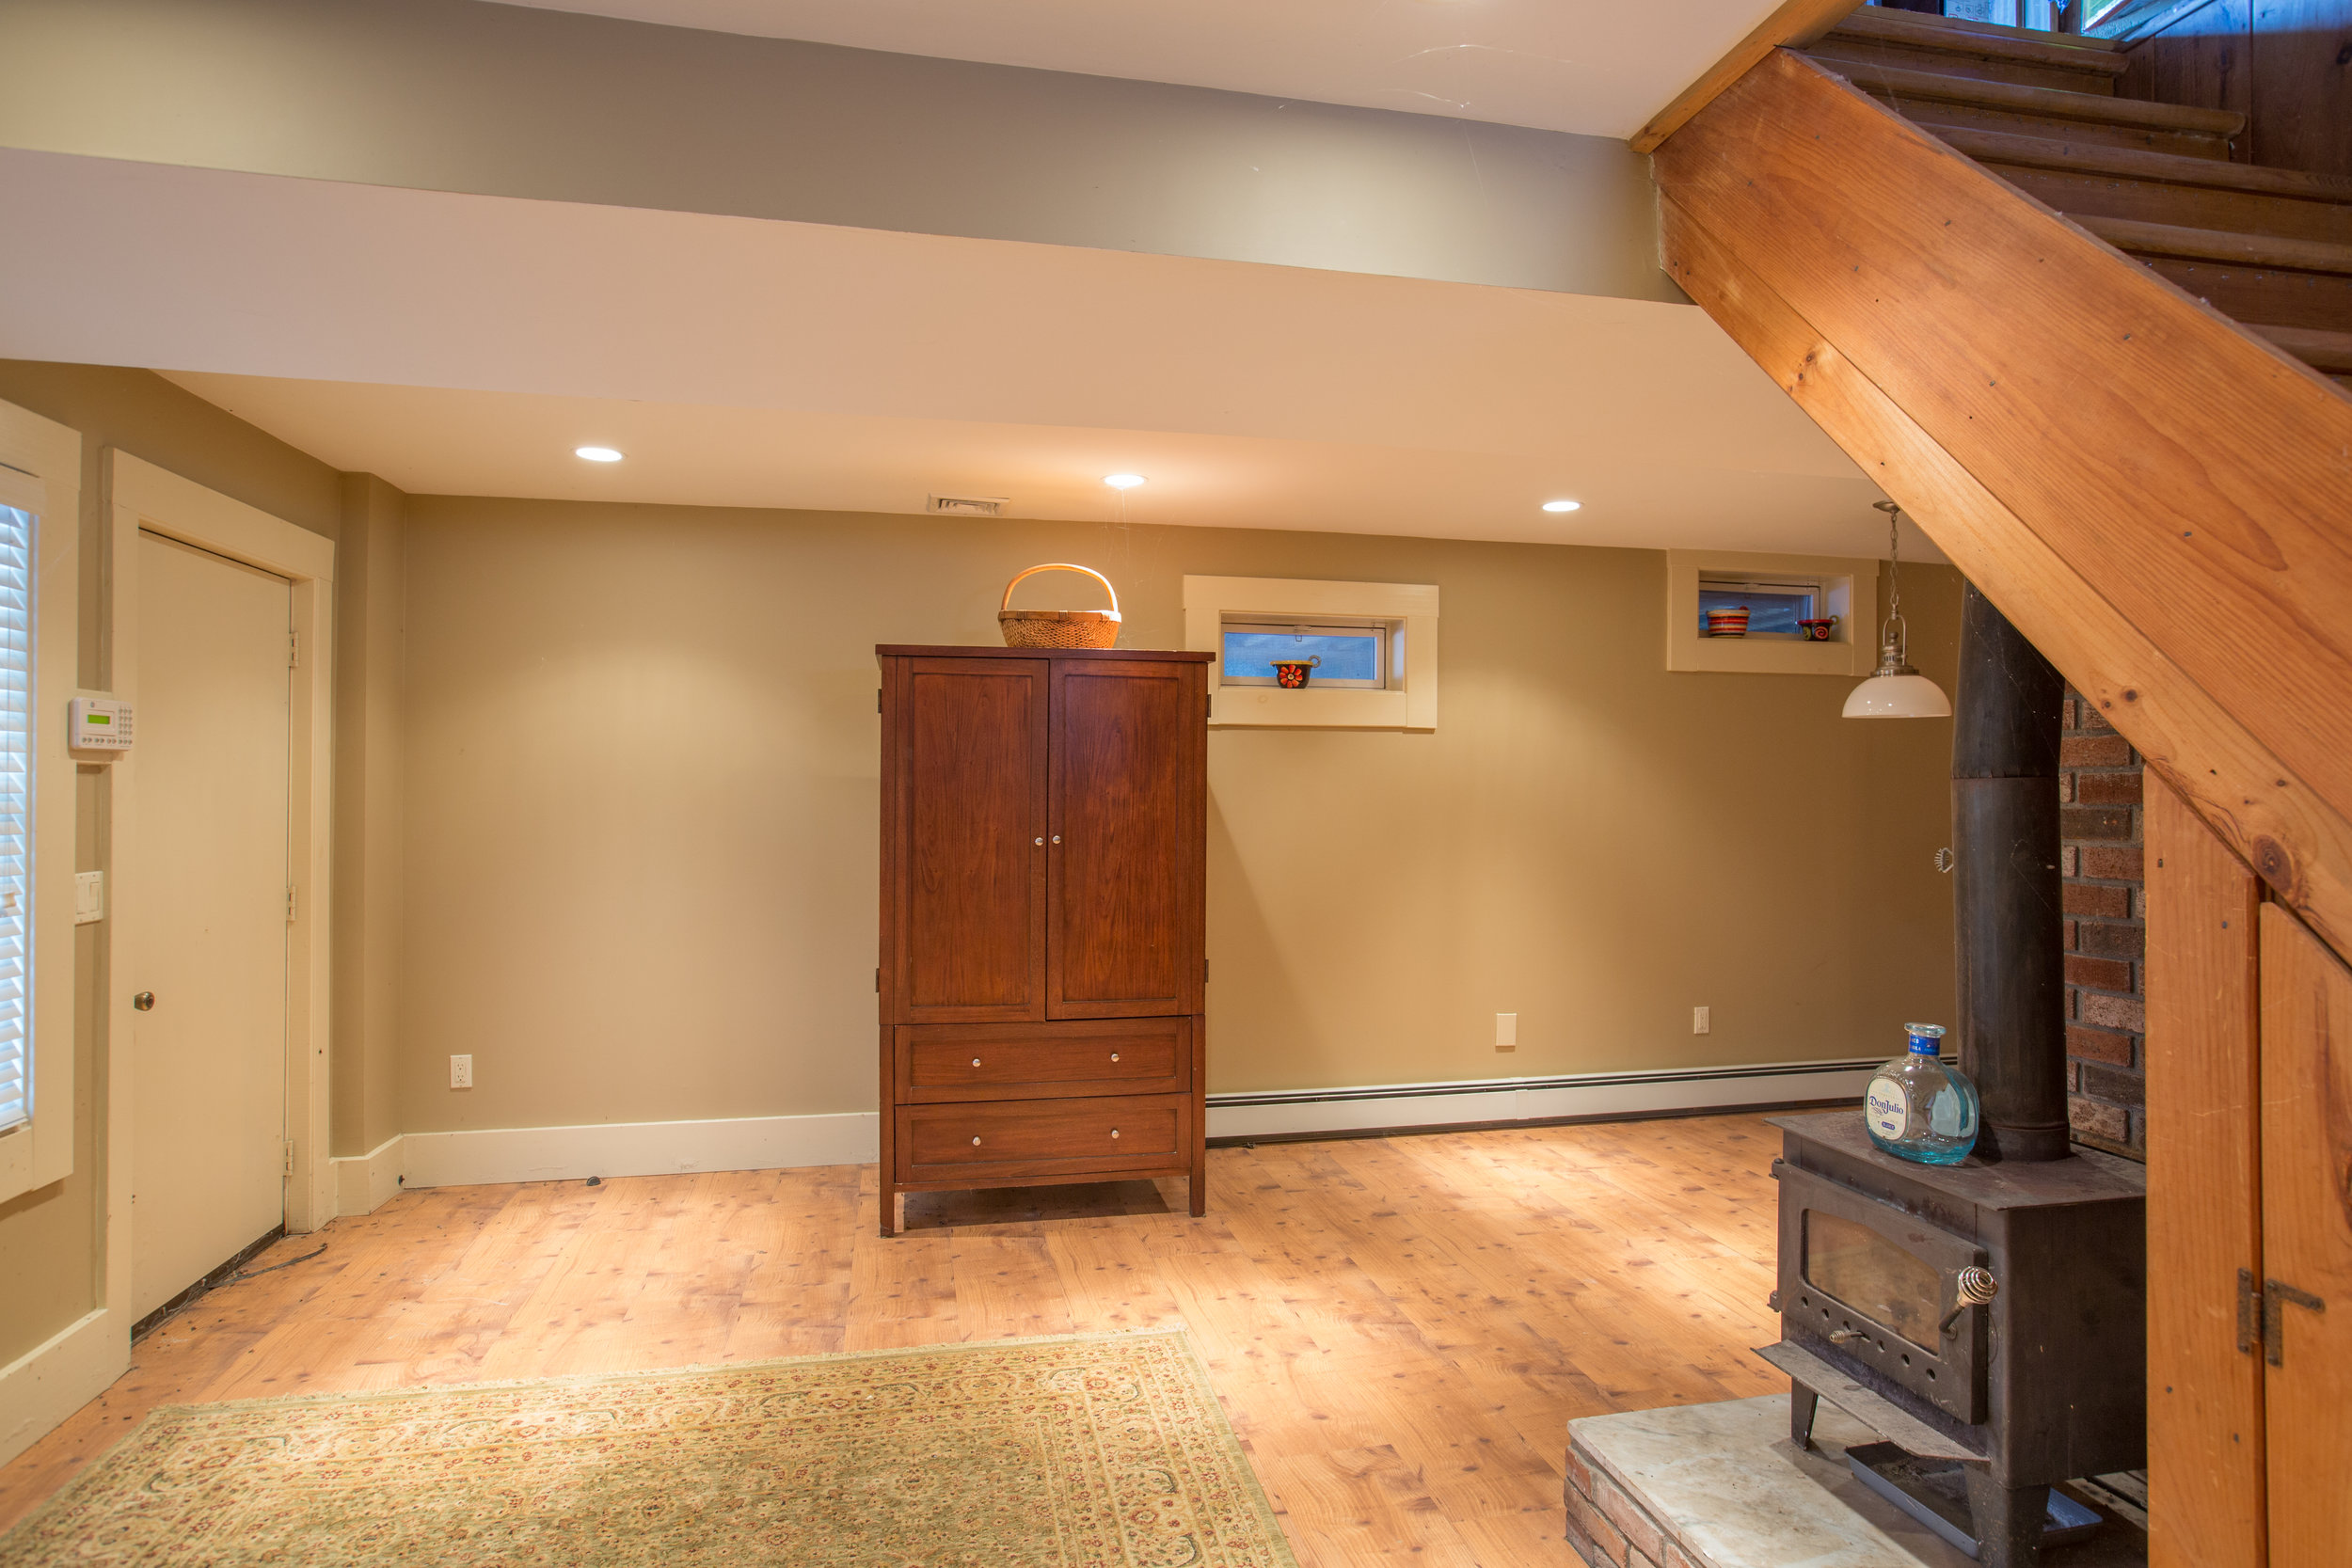  Finished basement that has a wood burning stove to the right side underneath the stairway.  An armor  sits nicely on the back wall with a basket on top.  Floors are a natural hardwood. 